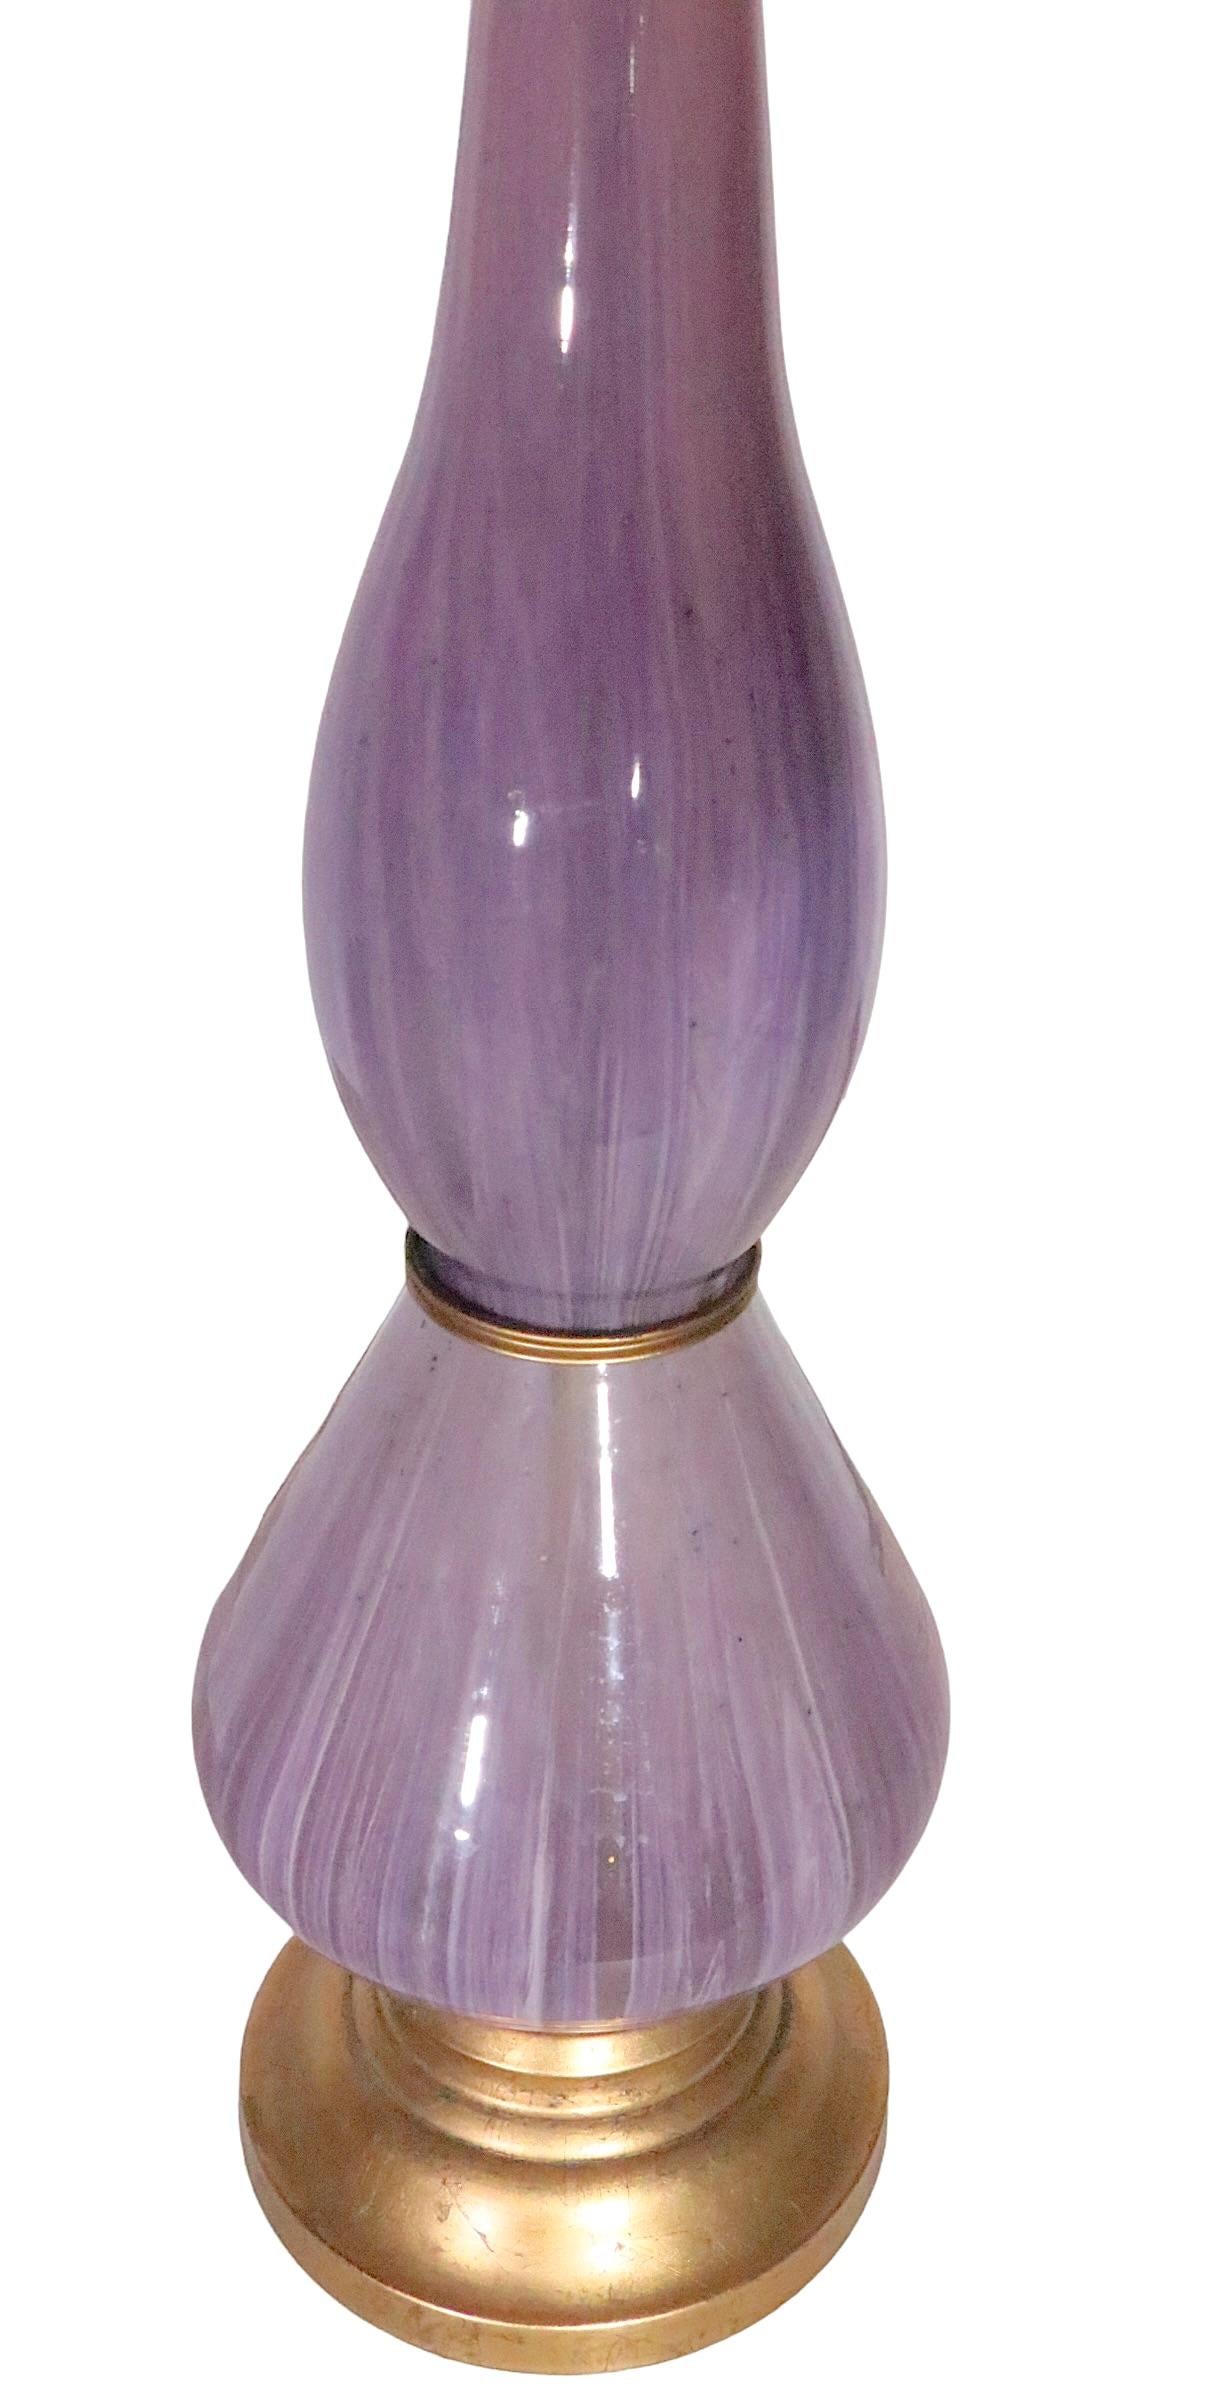 Hollywood Regency Large Murano Glass Table Lamp in Lavender Glass, circa 1950/1960s For Sale